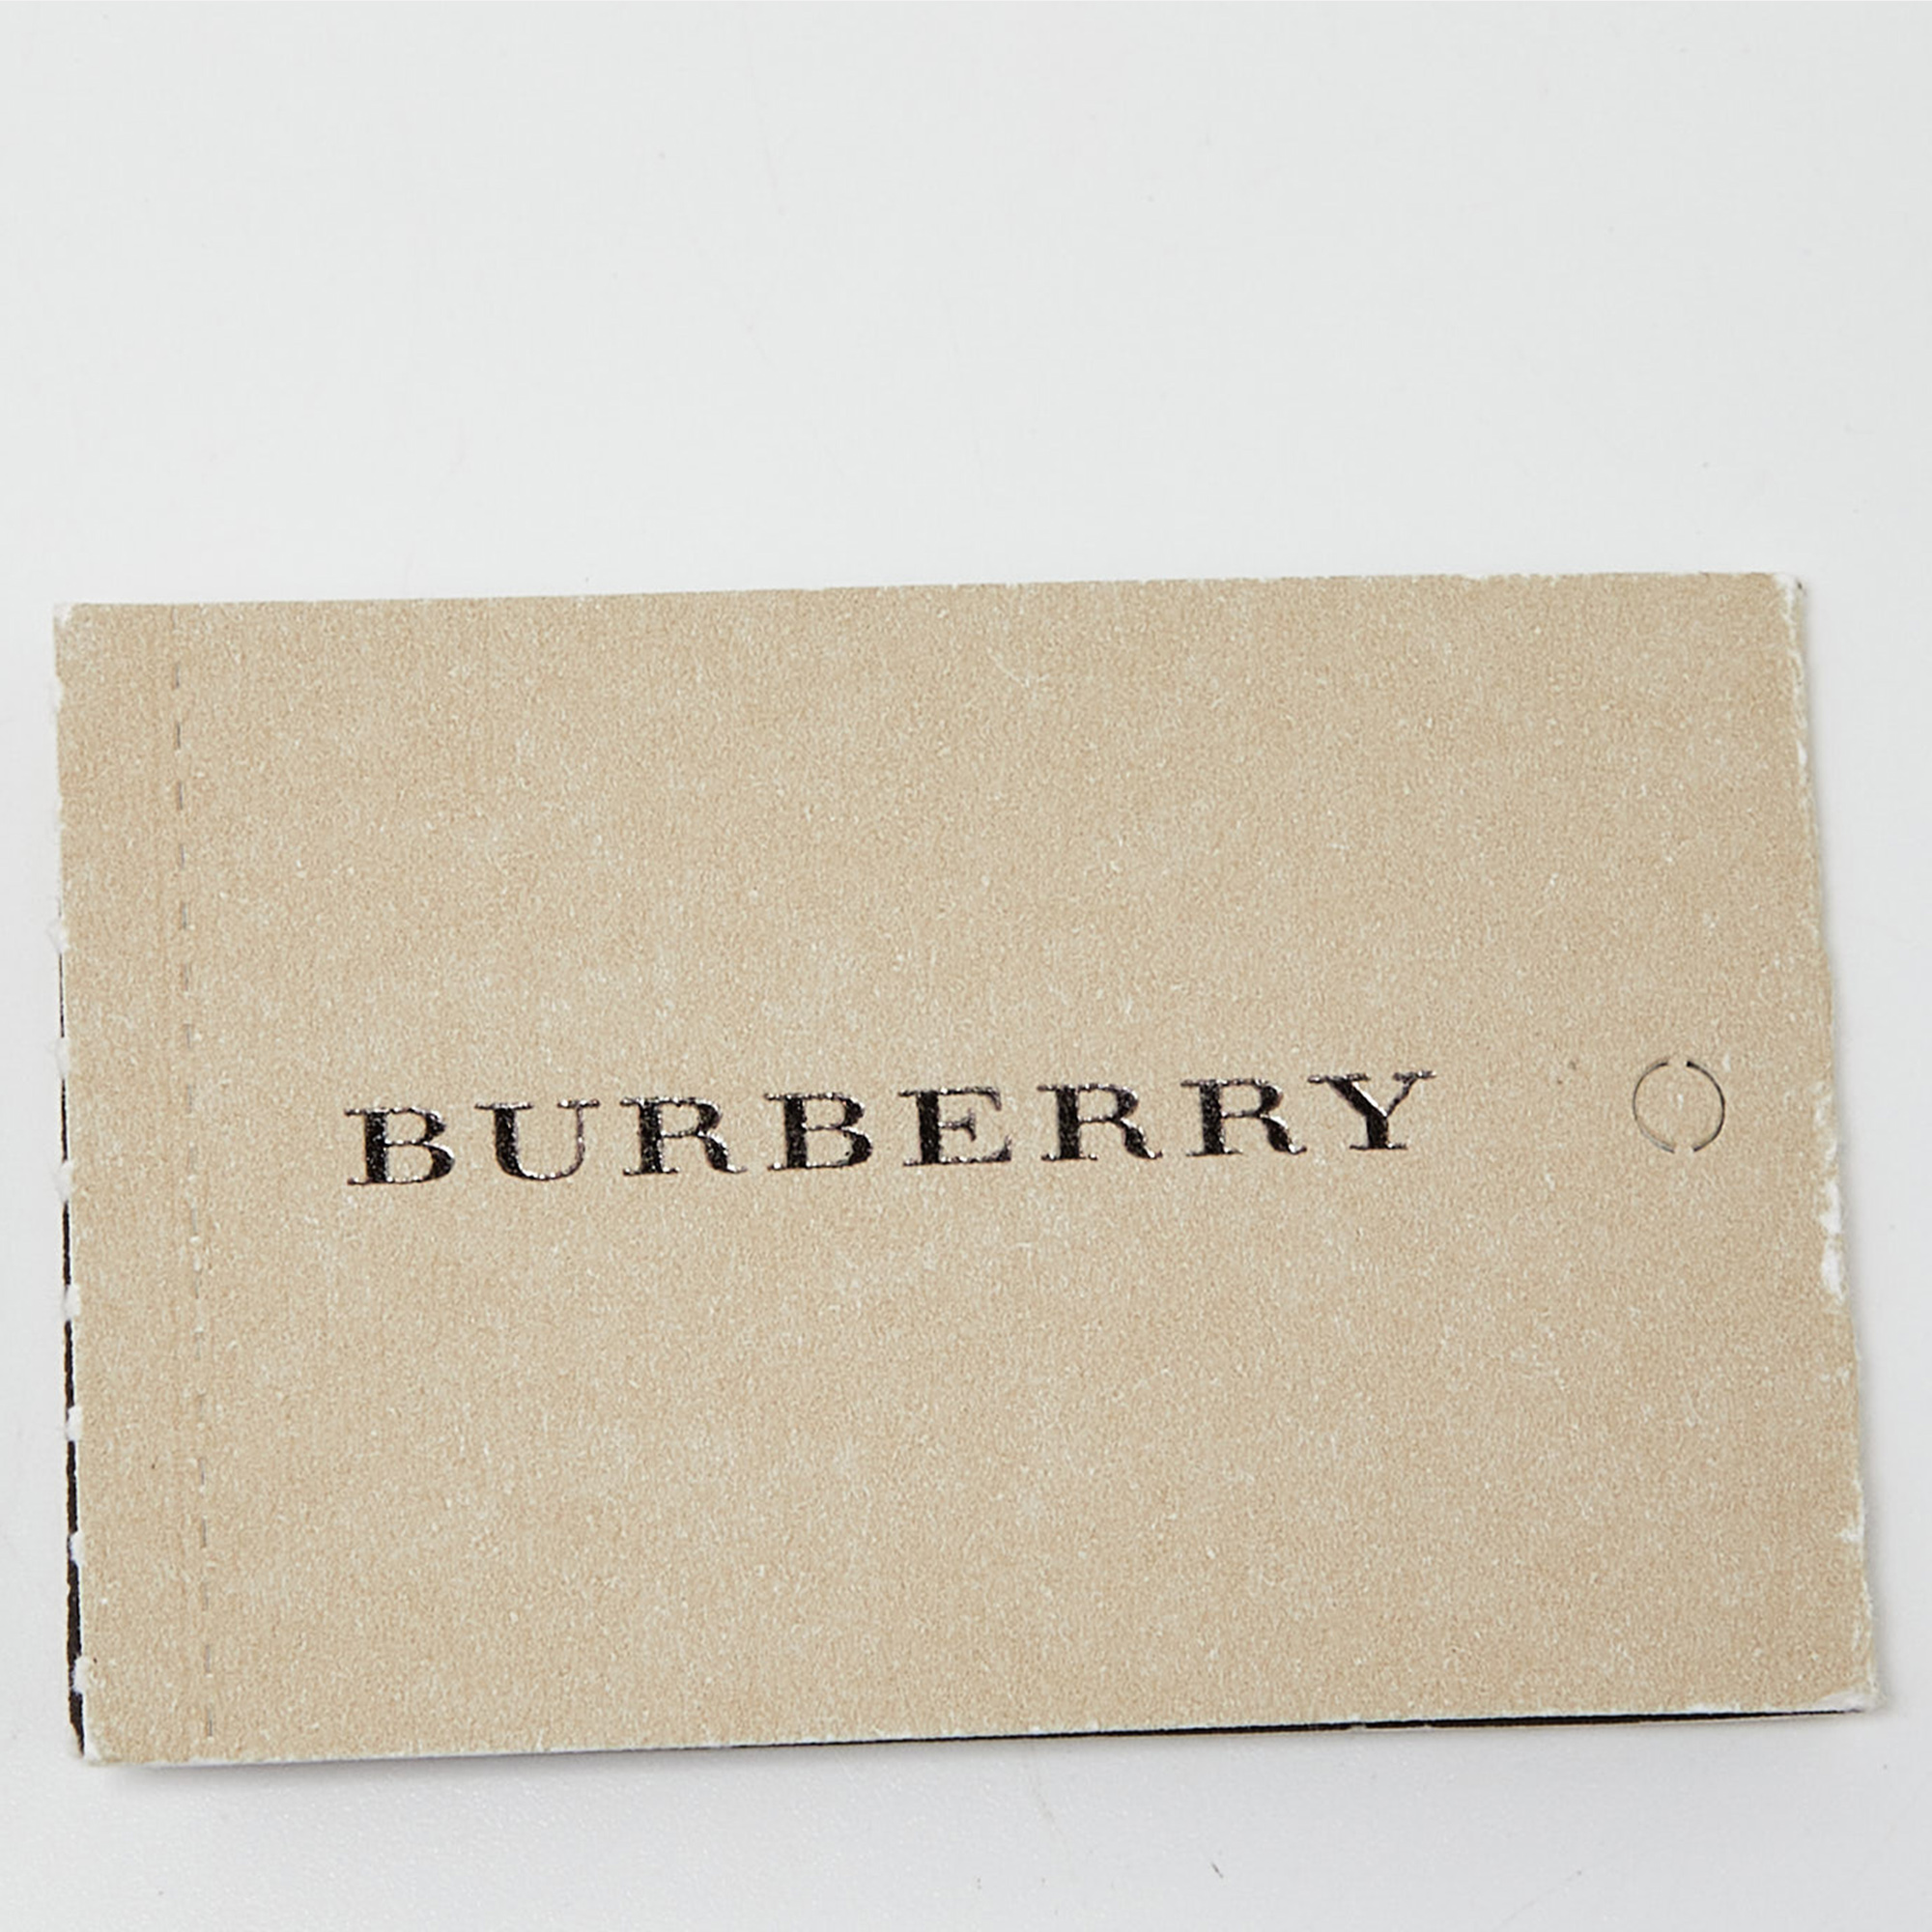 Burberry Green Patent Leather Continental Wallet